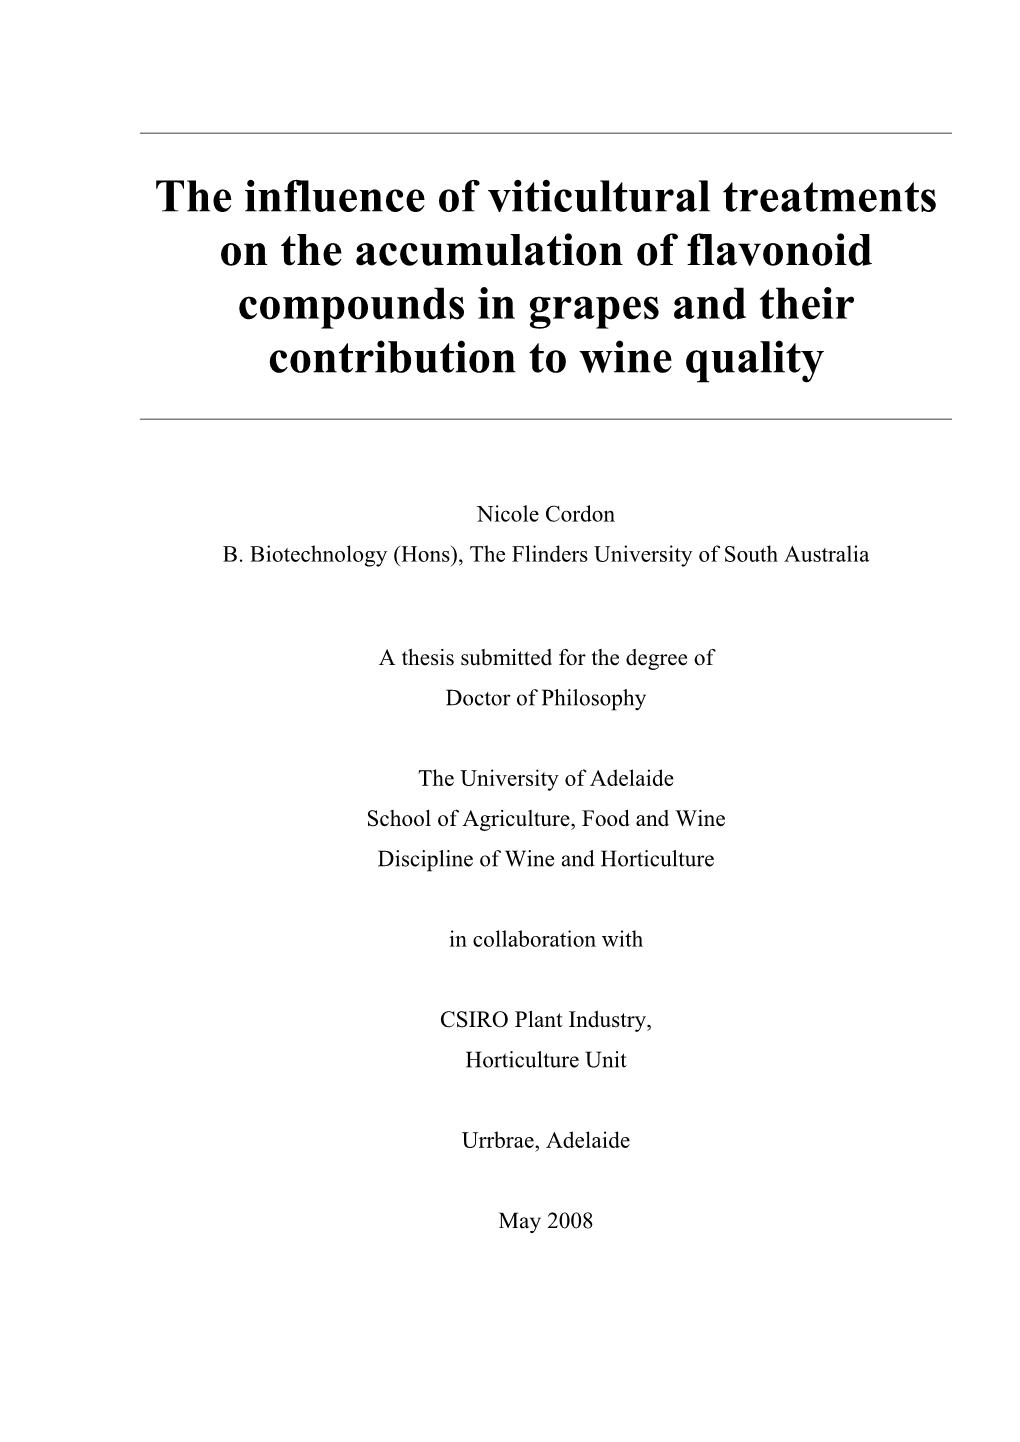 The Influence of Viticultural Treatments on the Accumulation of Flavonoid Compounds in Grapes and Their Contribution to Wine Quality